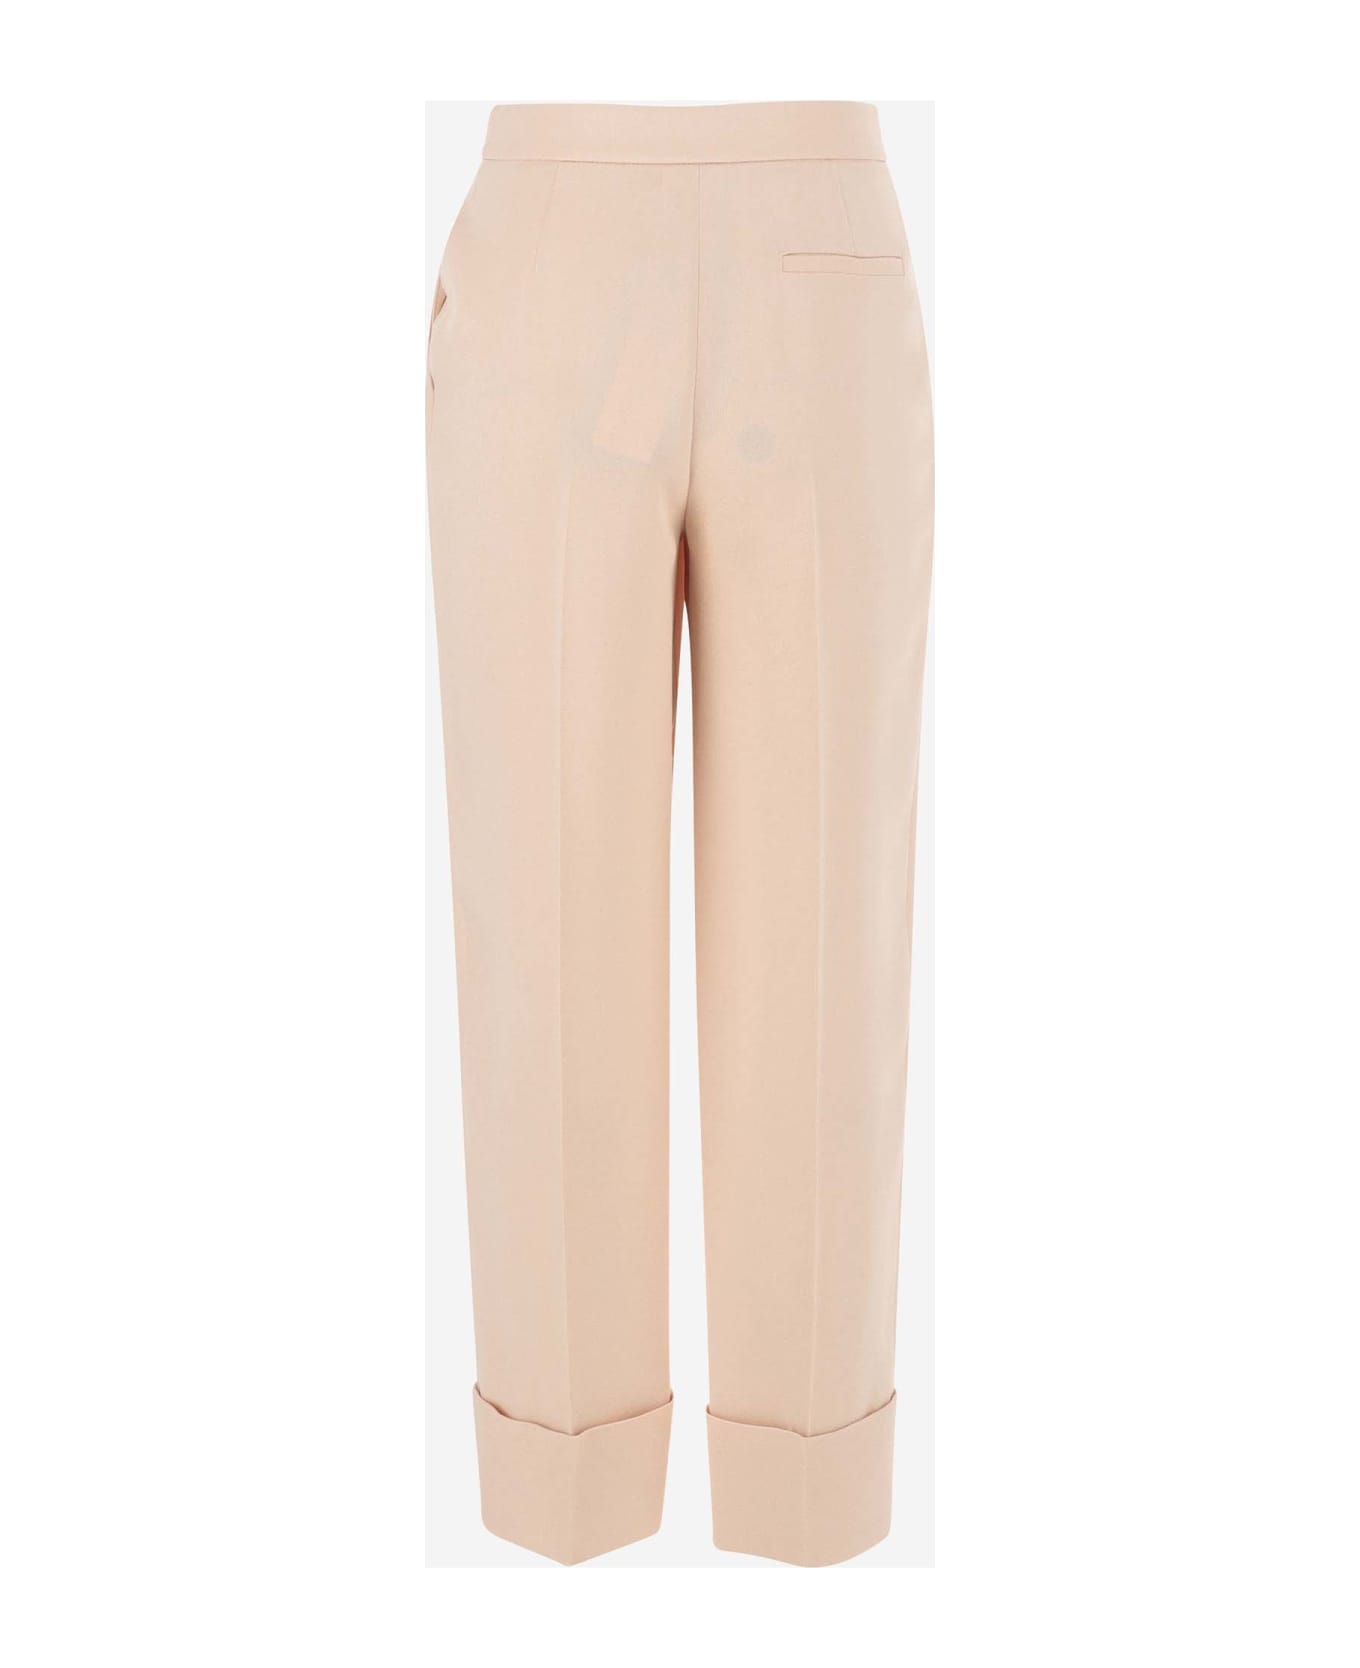 Giorgio Armani Concealed Trousers - Pink ボトムス